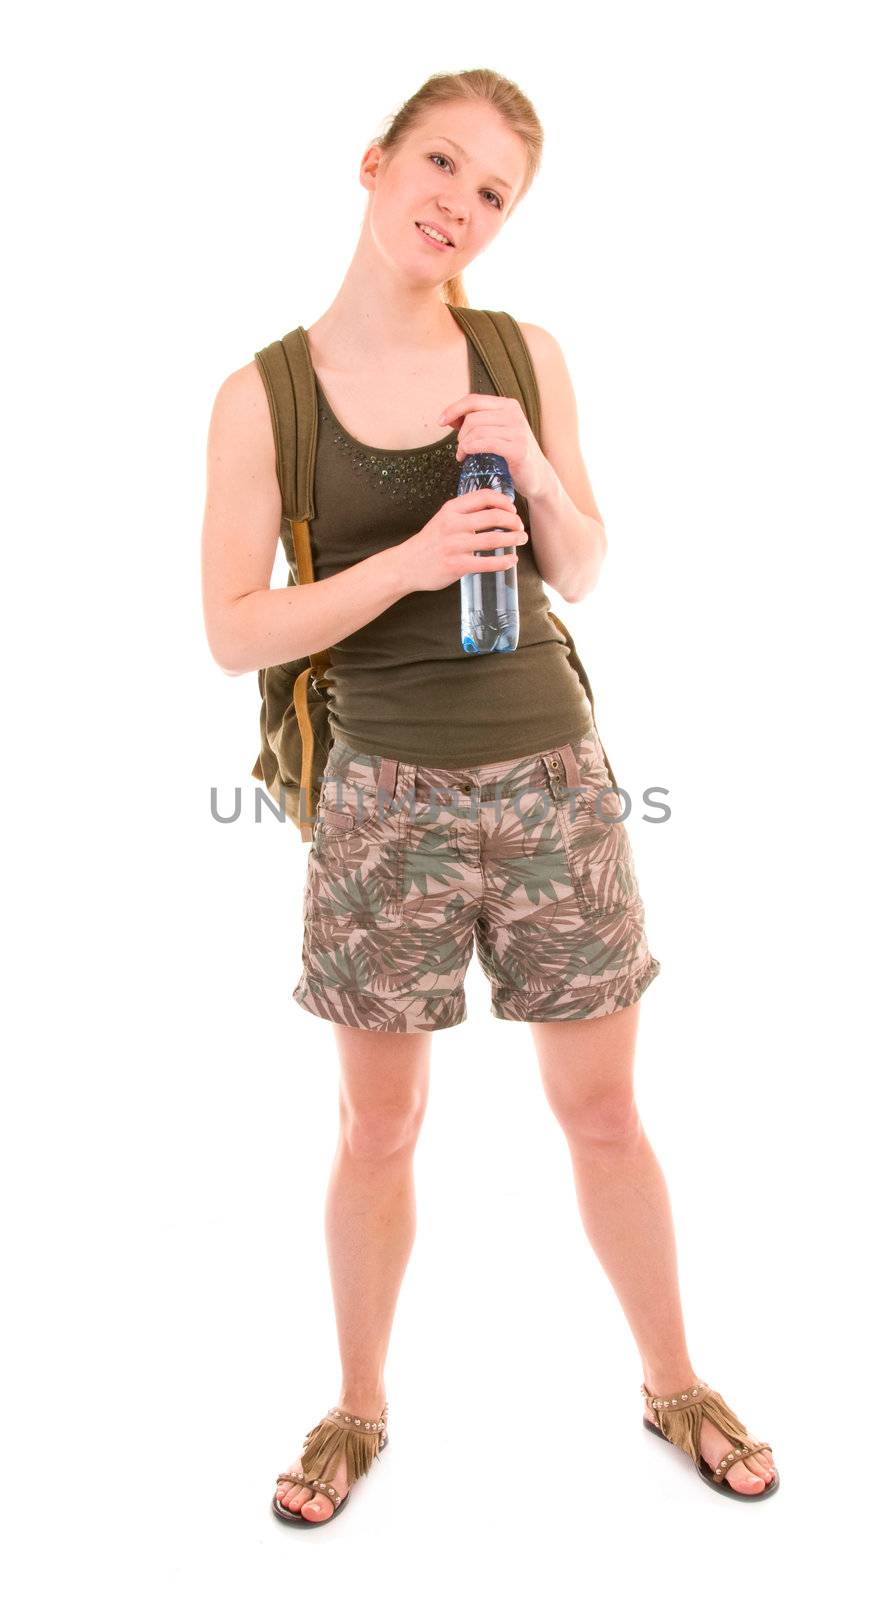 Backpacker a young woman with water bottle isolated on white backgroumd